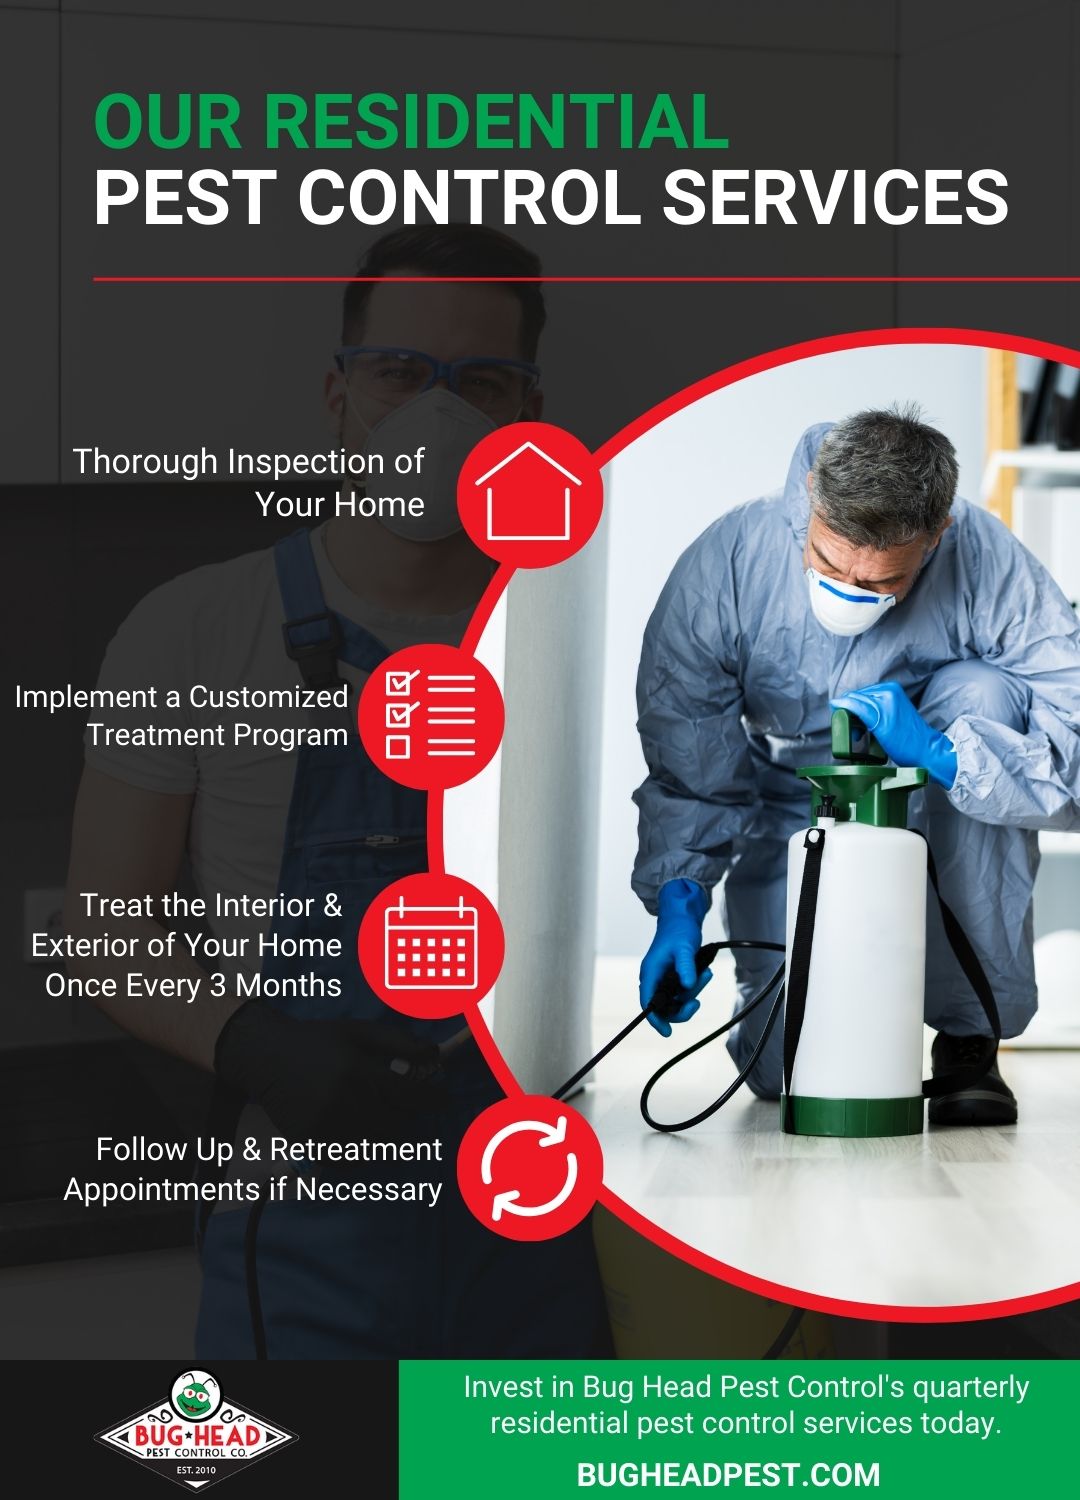 M35984 - Bug Head Pest Control Infographic Residential Services